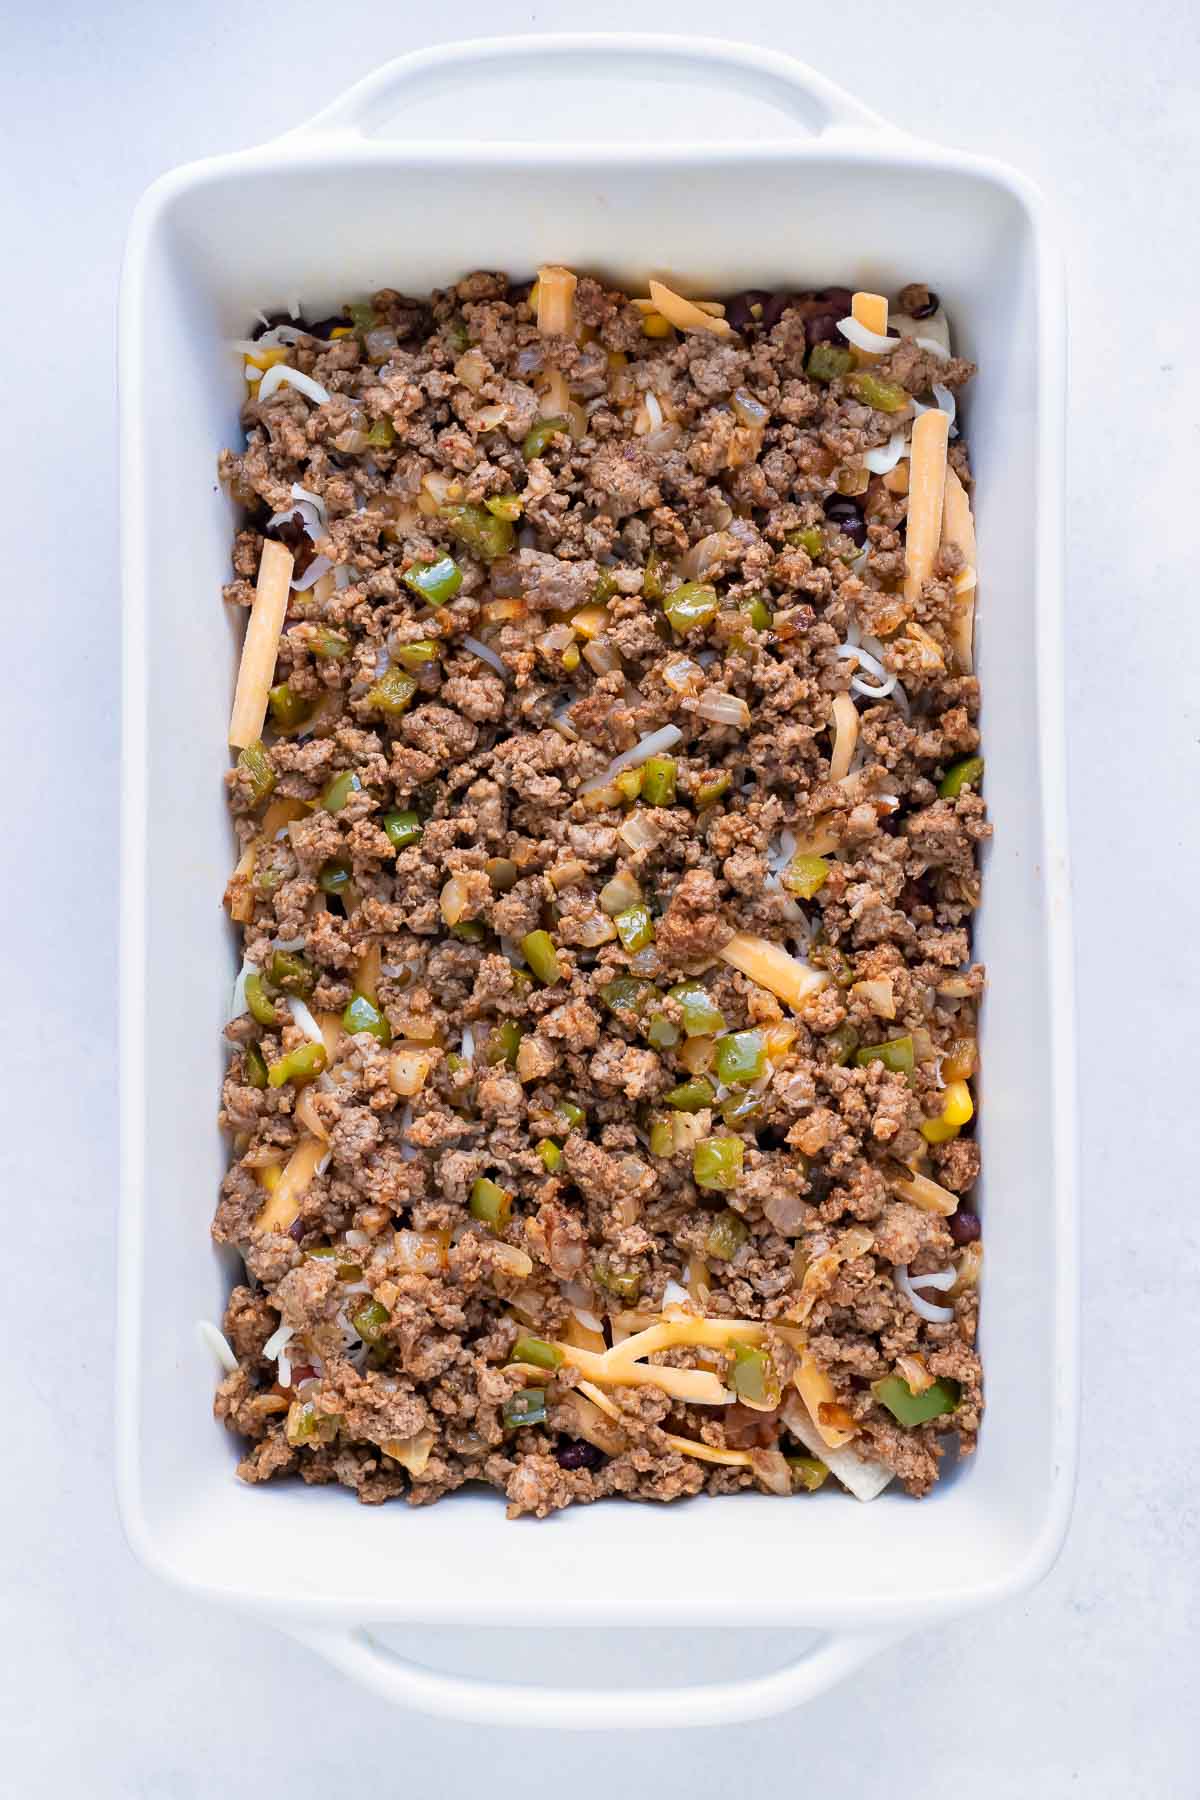 Ground meat and sautéed vegetables are placed in a casserole dish.